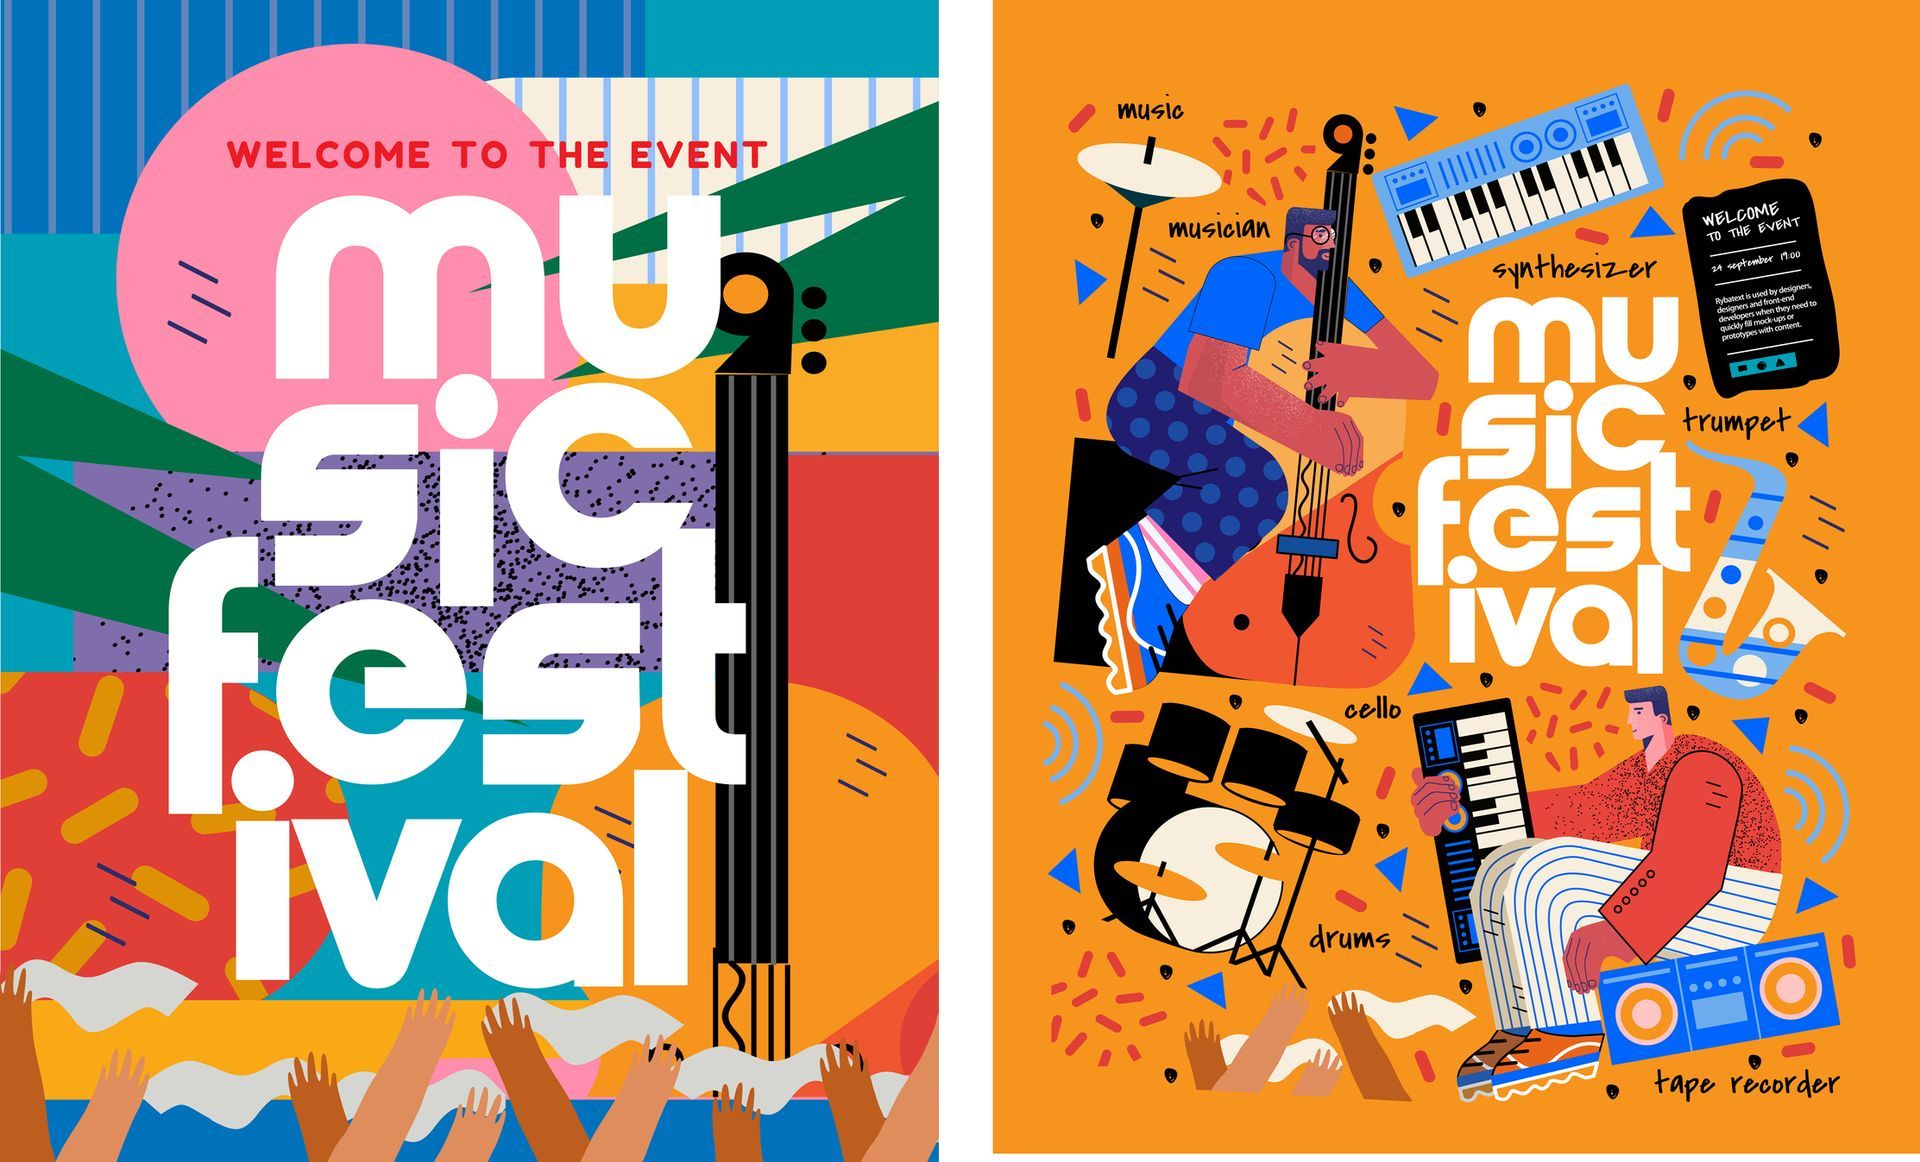 Fast, Affordable Printed Music Festival Flyers in Burbank, CA